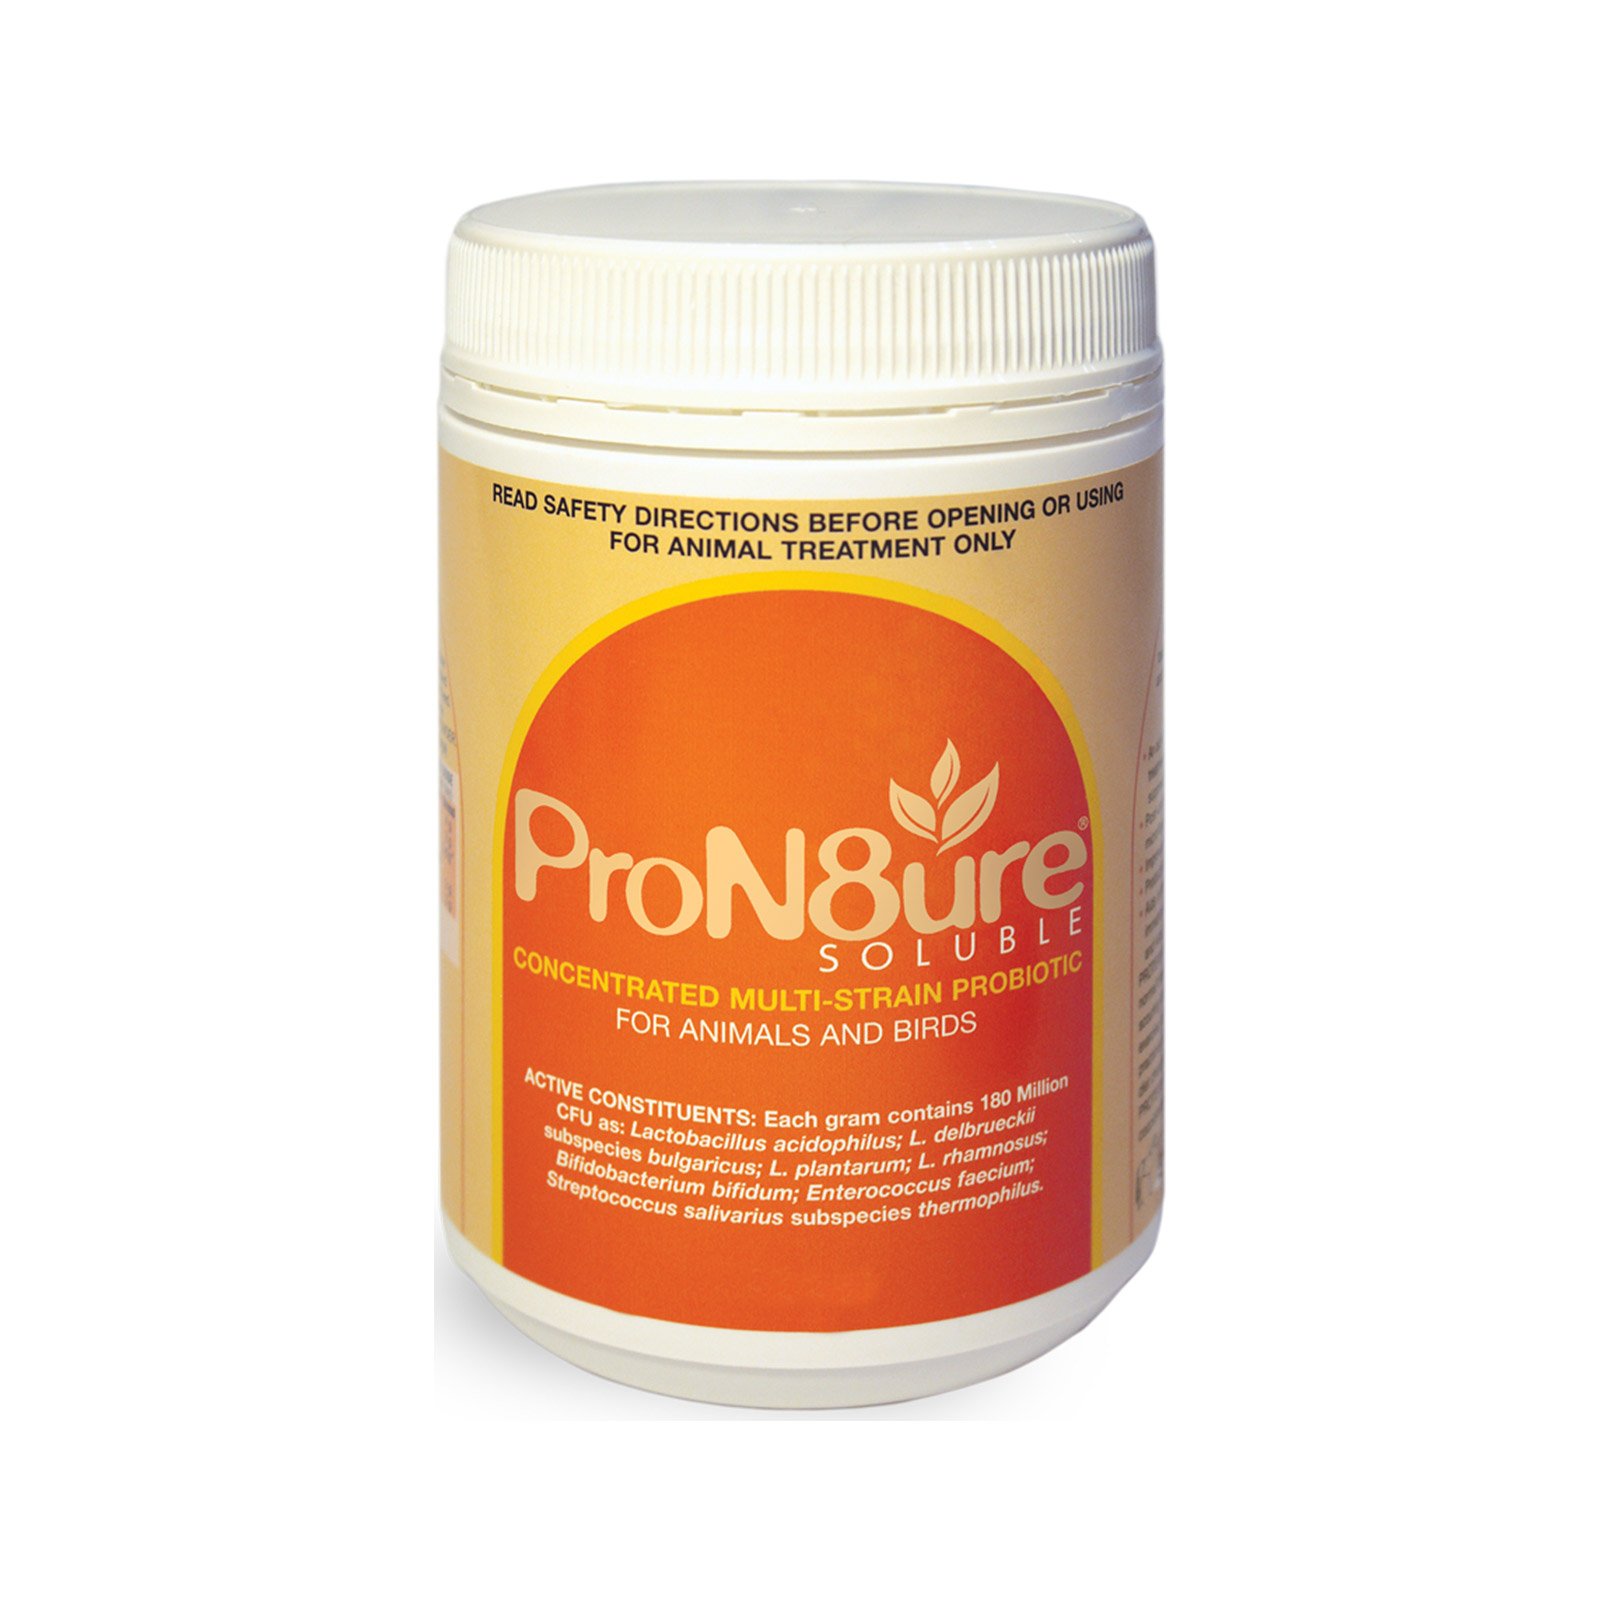 Pron8ure (Protexin) Soluble  125 Gms